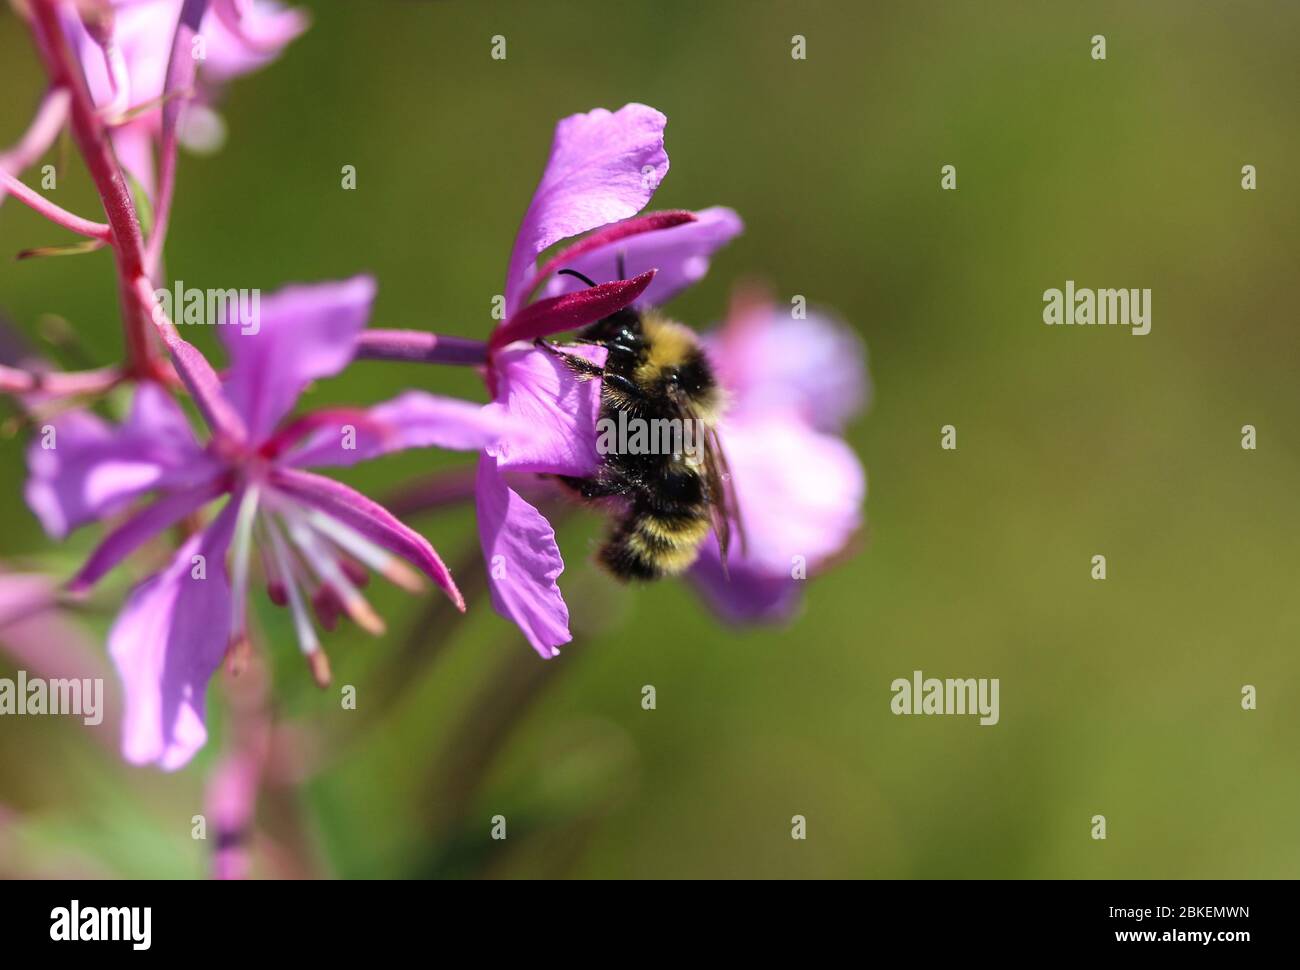 Close up of Bombus campestris, a common cuckoo bumblebee Stock Photo